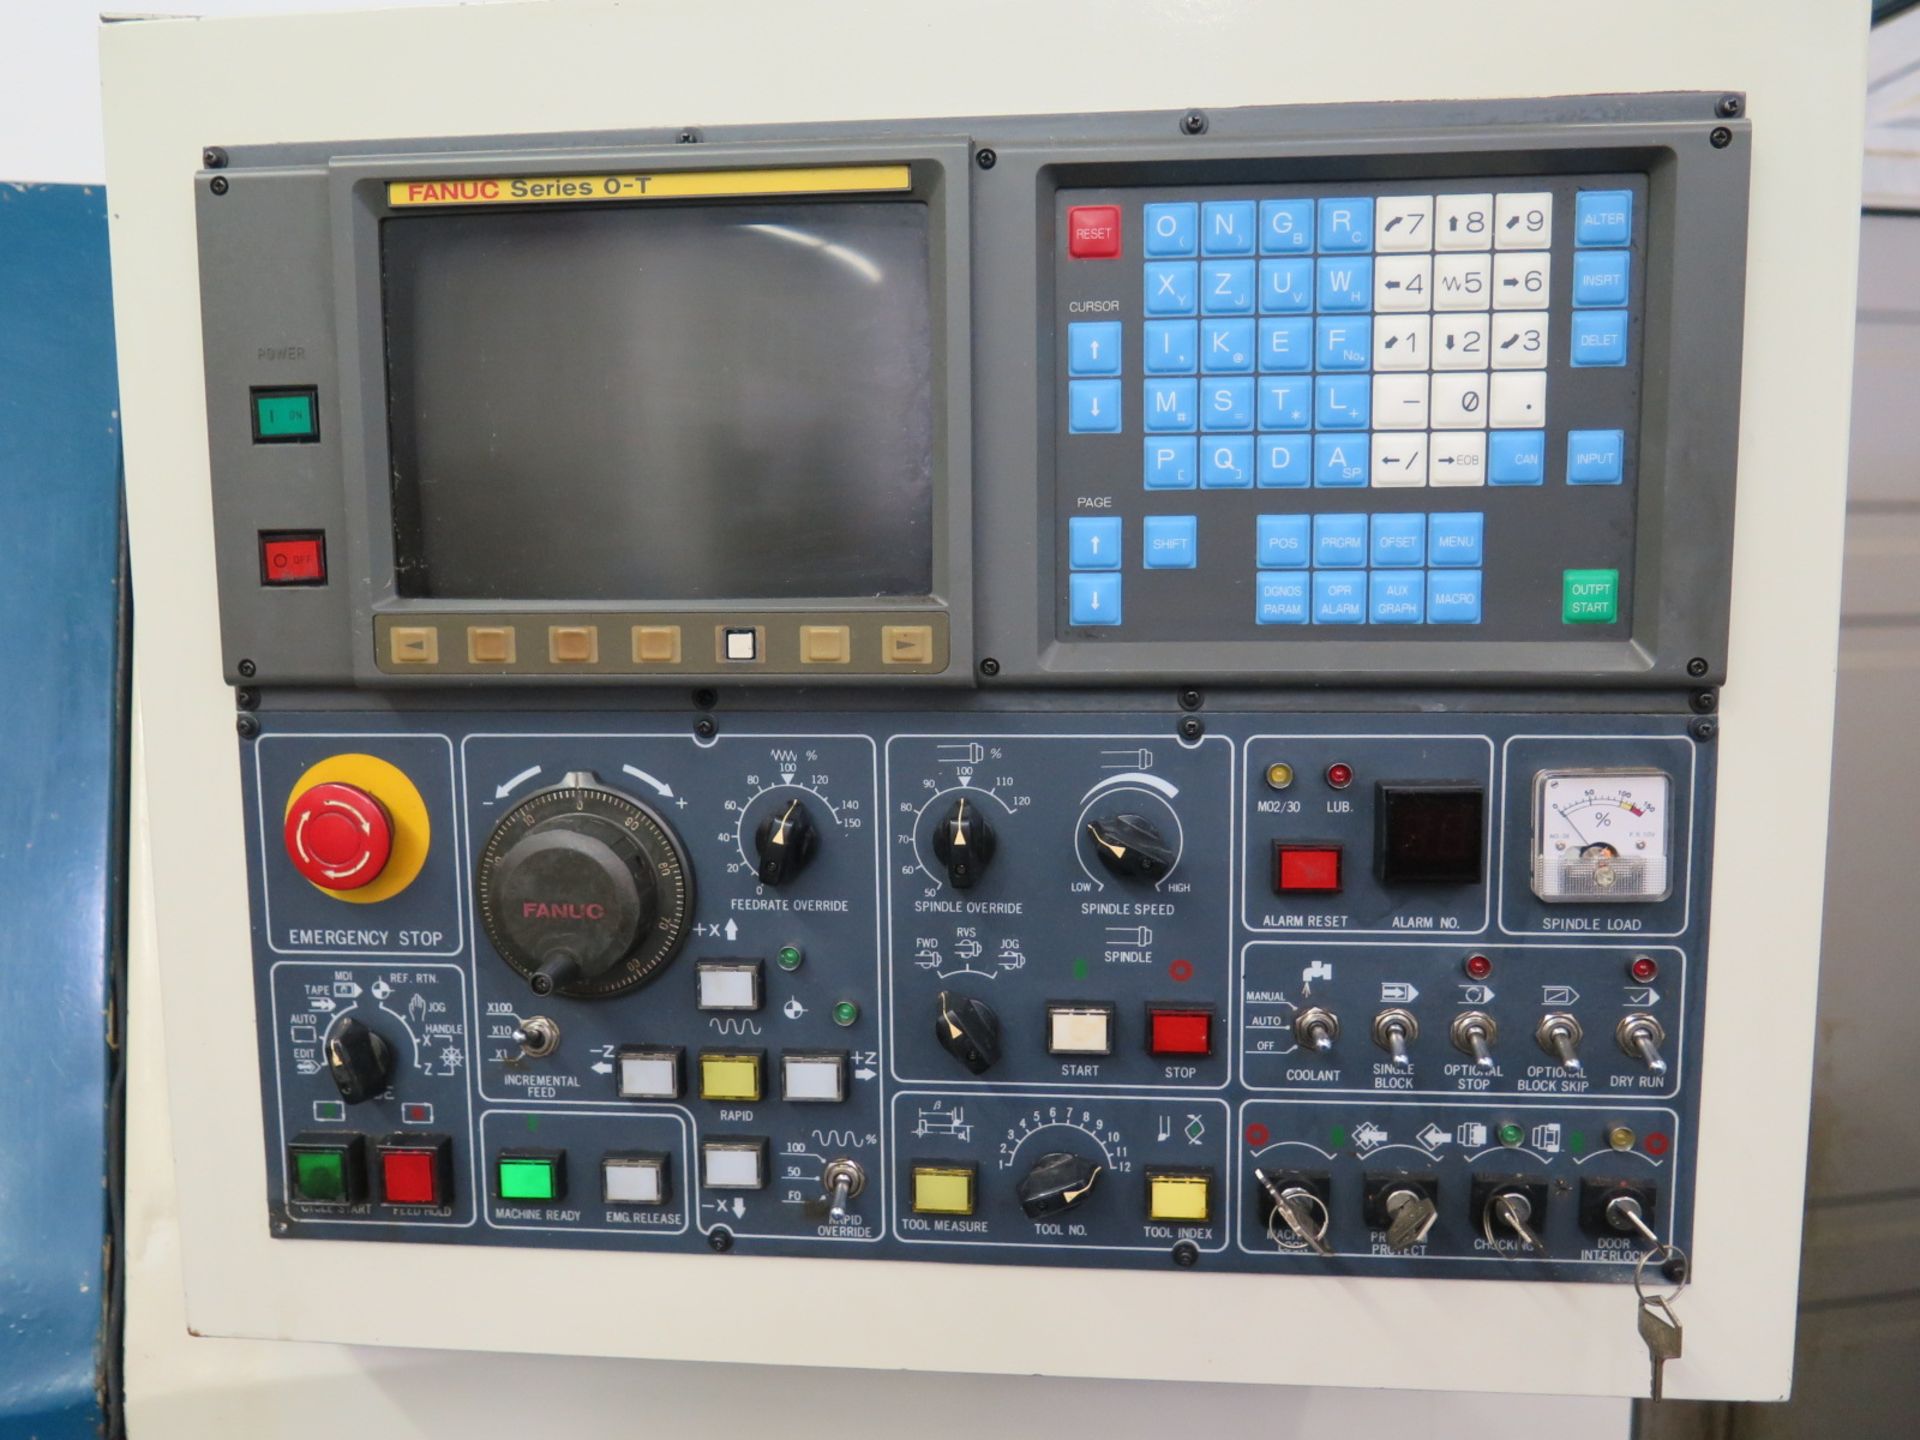 1995 Daewoo PUMA-6S CNC Turning Center s/n PM6S-0392 w/ Fanuc Series 0-T Controls, 12-Station - Image 2 of 7